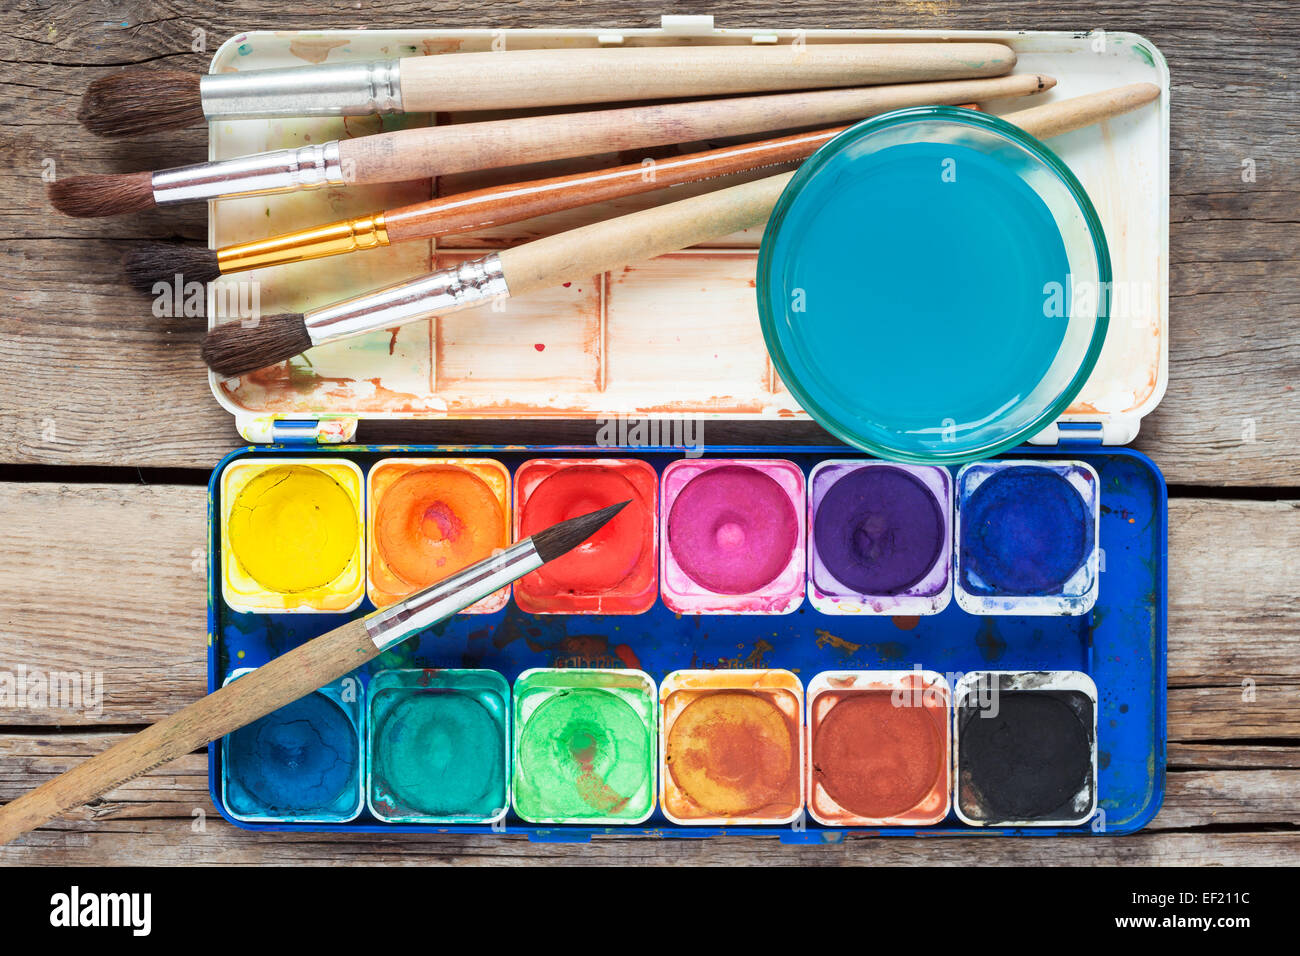 https://c8.alamy.com/comp/EF211C/set-of-watercolor-paints-art-brushes-and-glass-of-water-on-old-wooden-EF211C.jpg